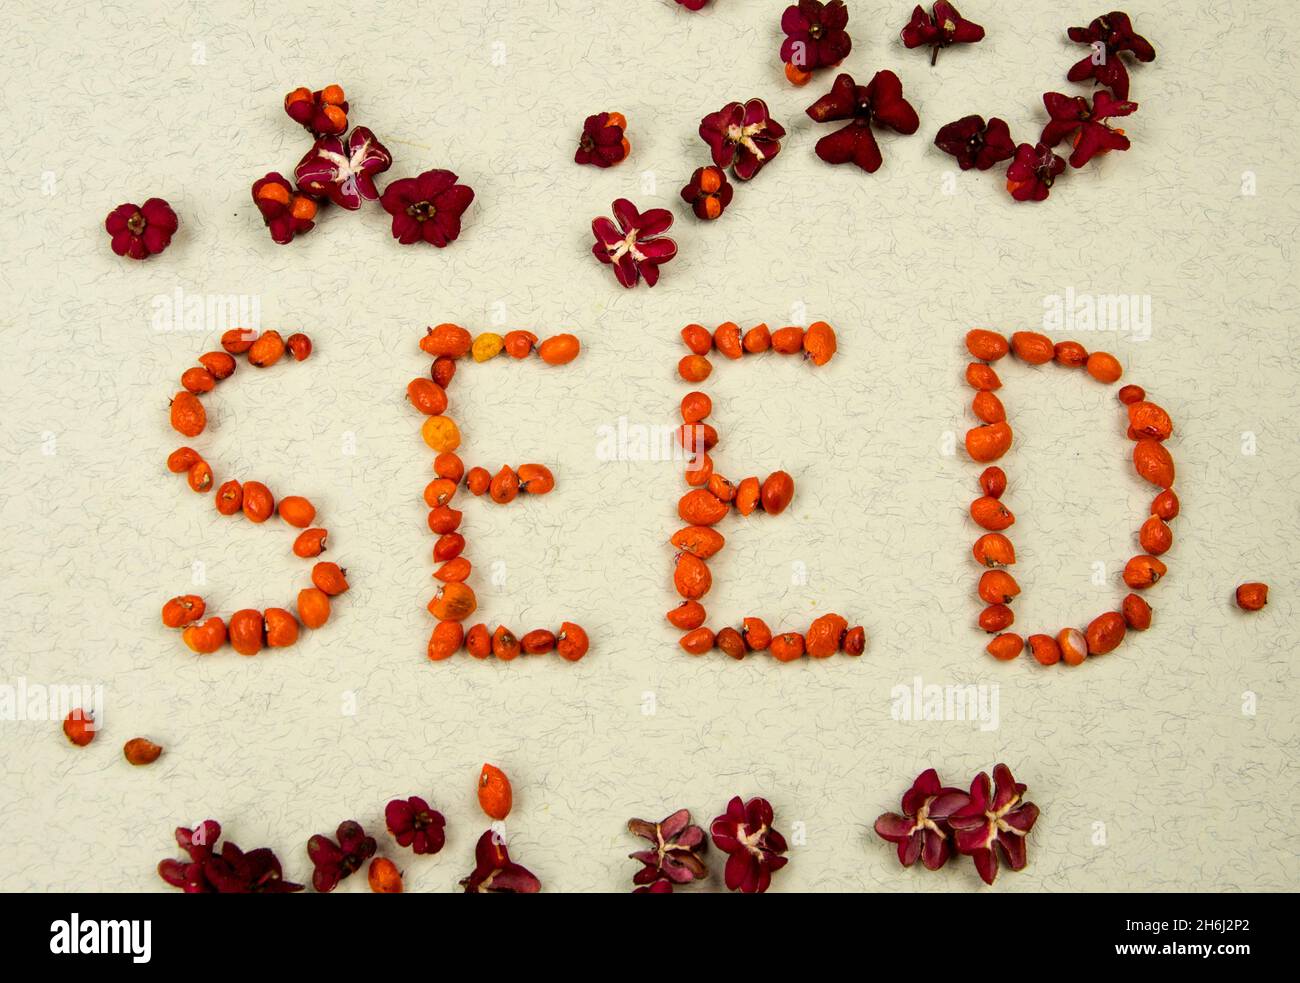 Word made by seeds of the spindle tree Stock Photo